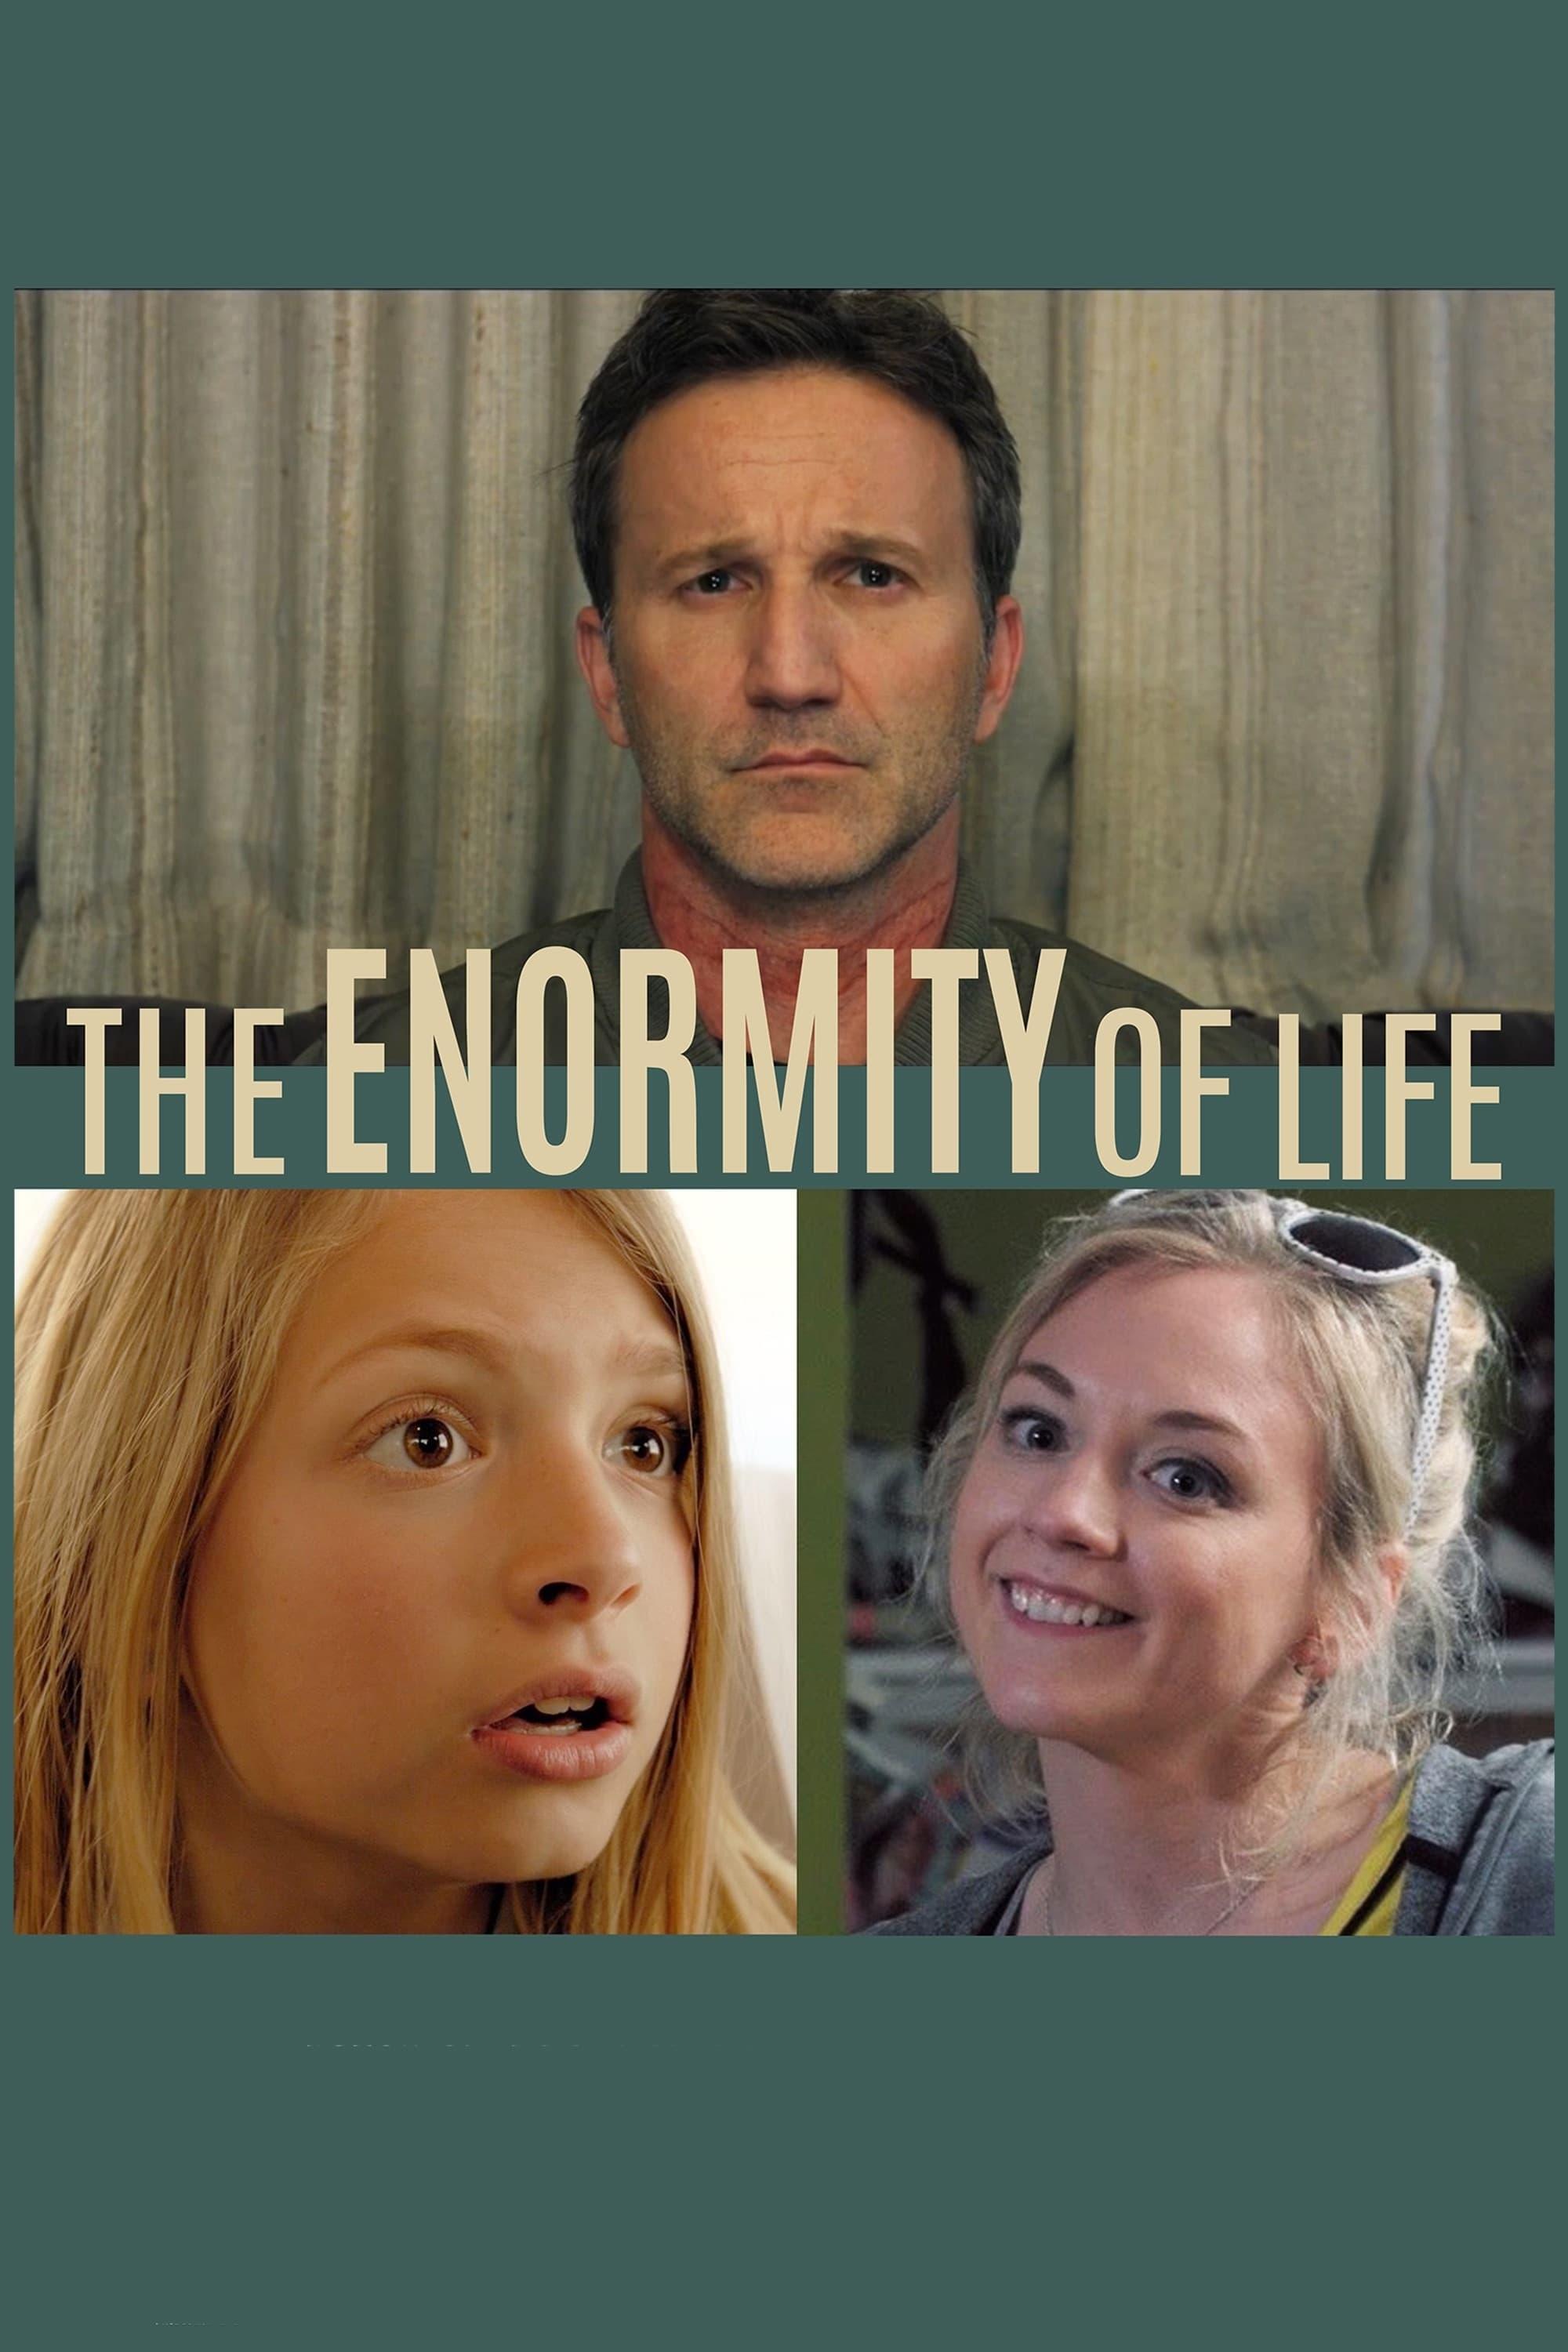 The Enormity of Life poster